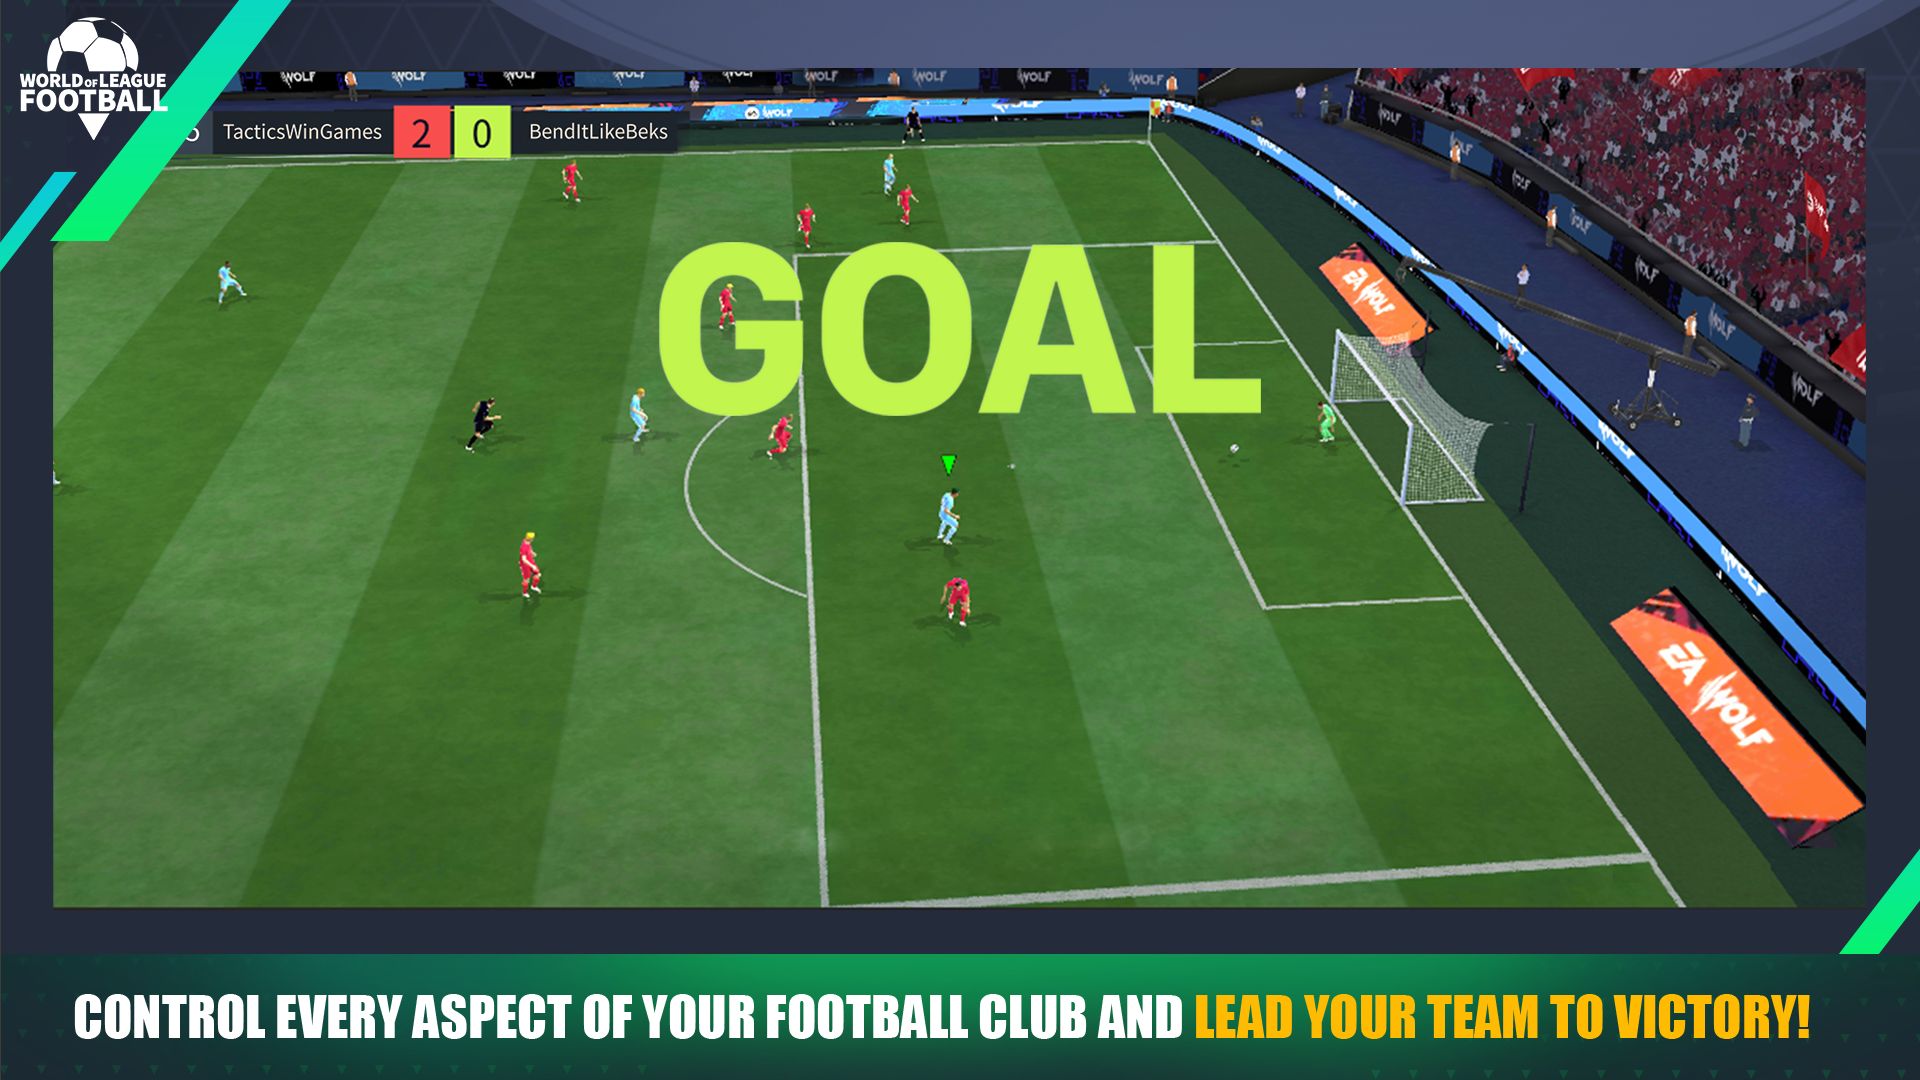 Gameplay of the World of League Football for Android phone or tablet.